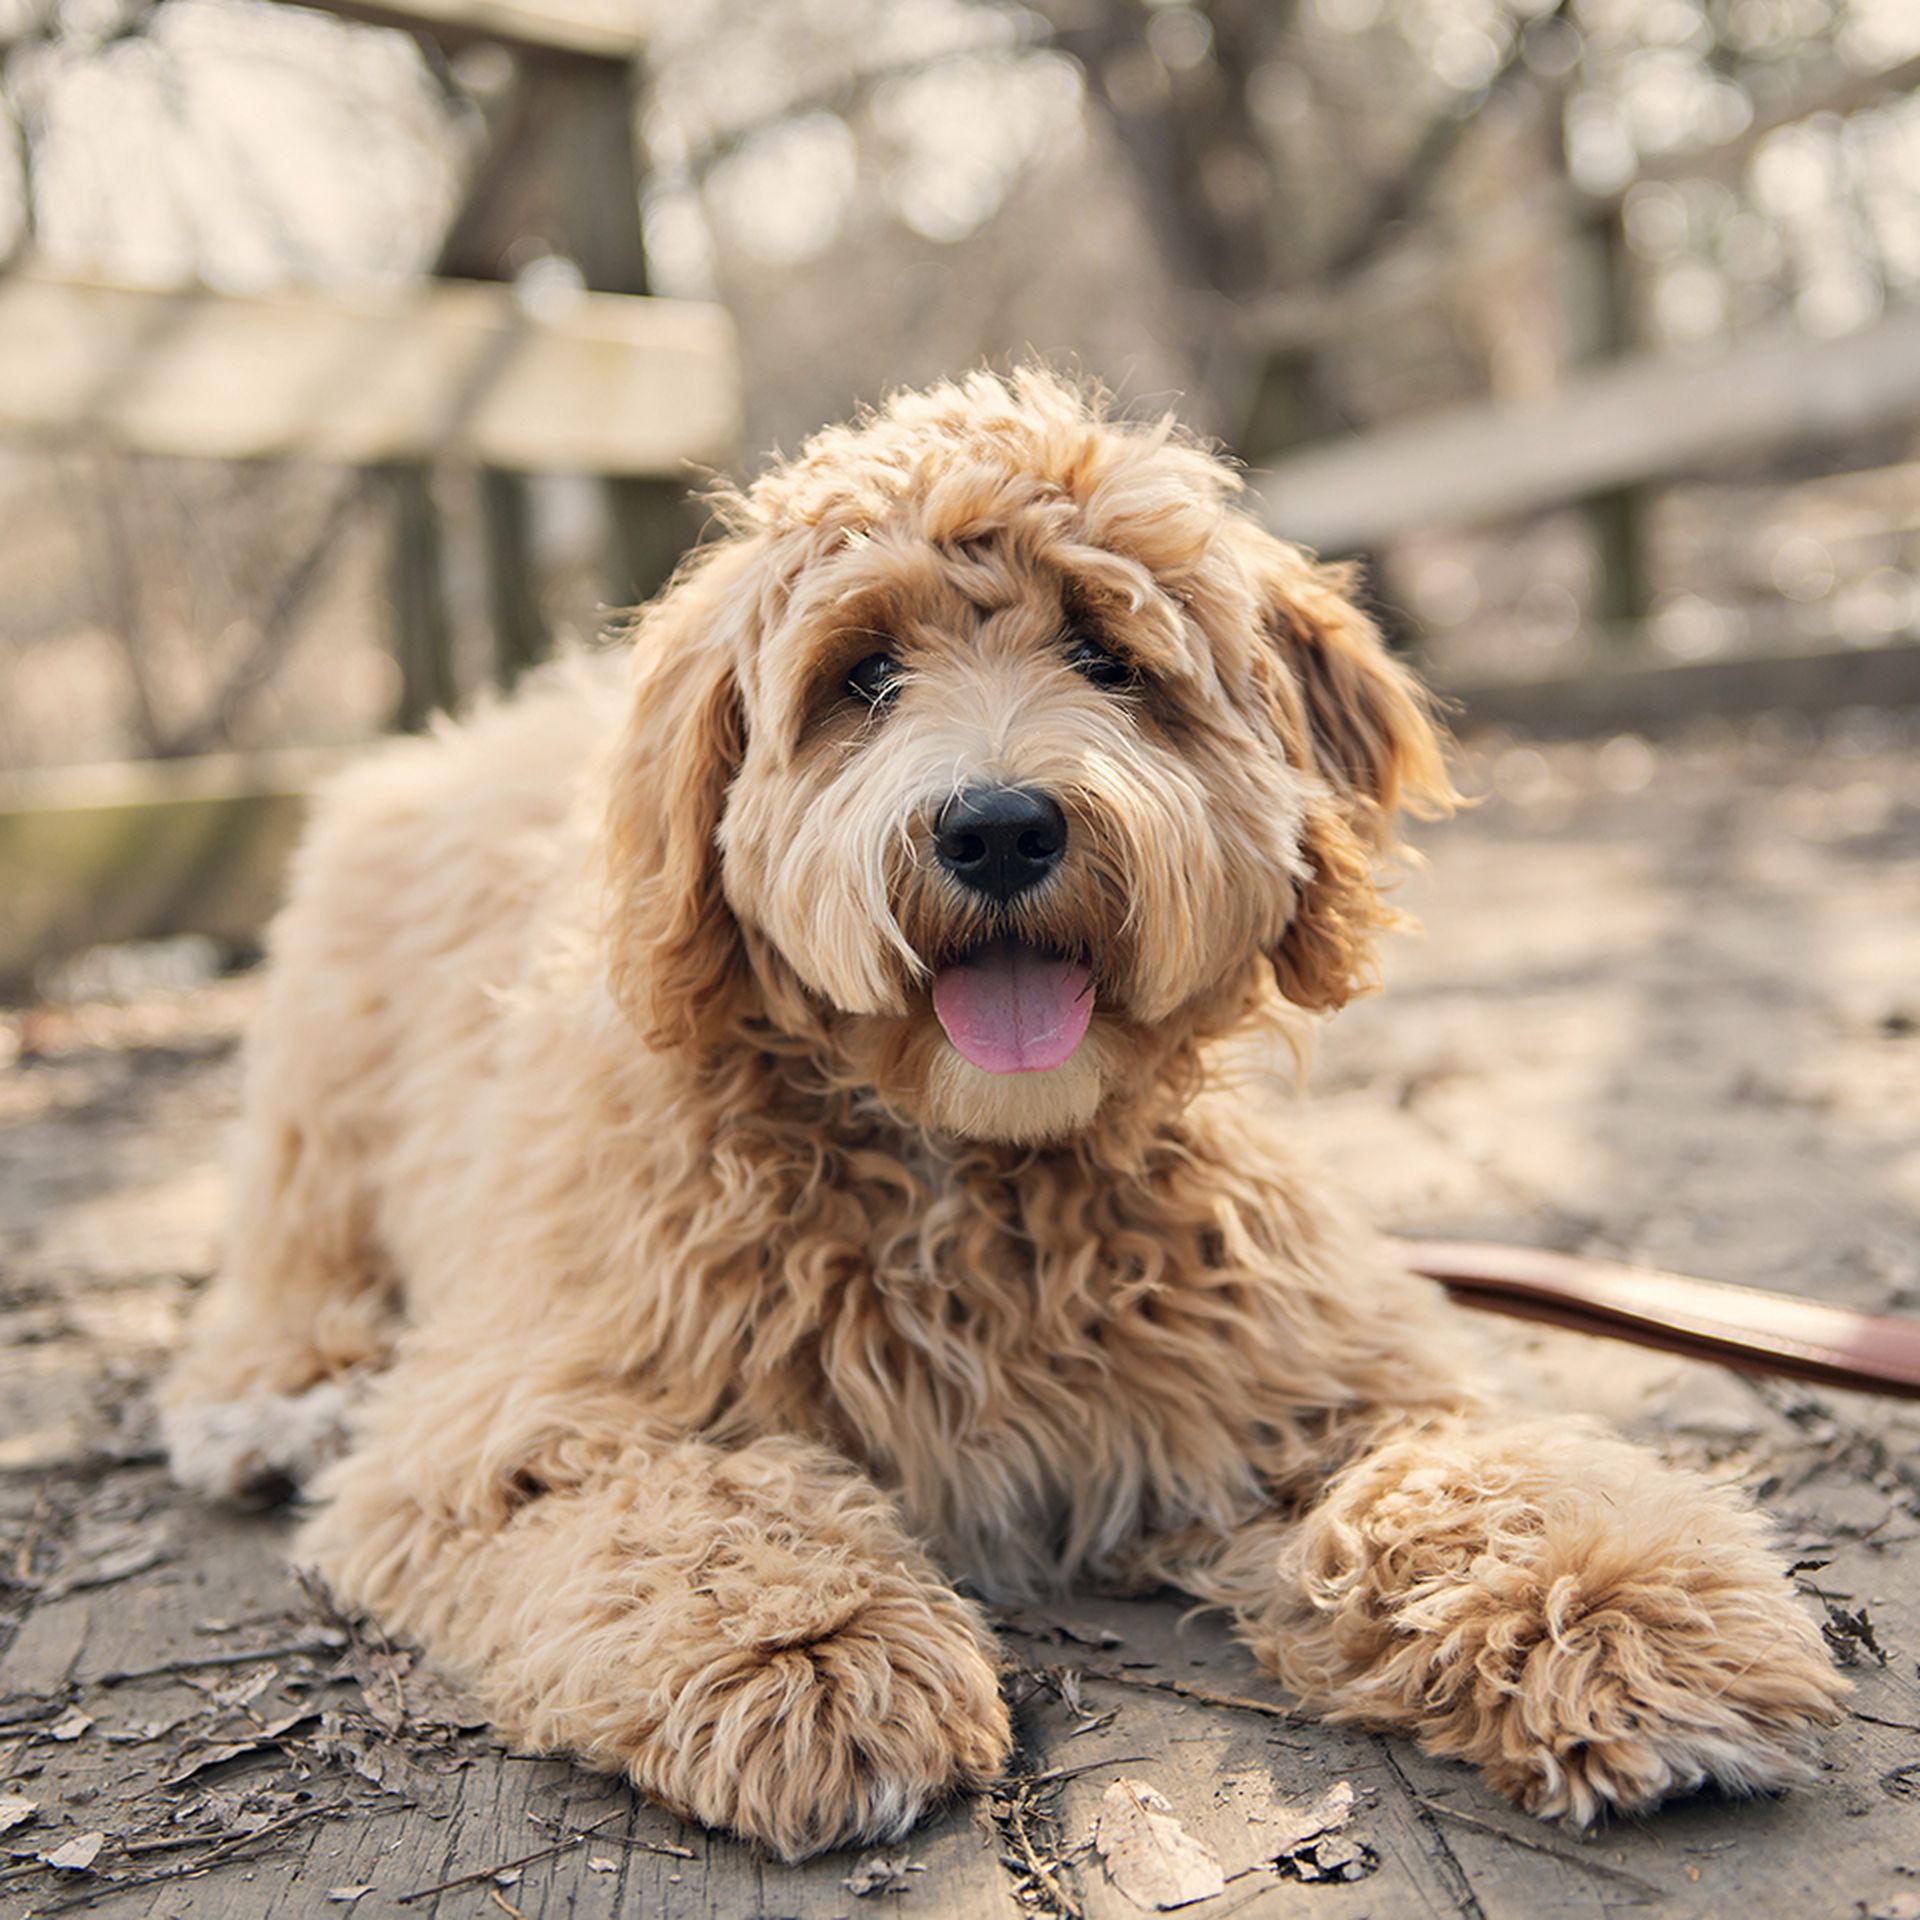 A happy goldendoodle laying on a wooden floor outdoors.